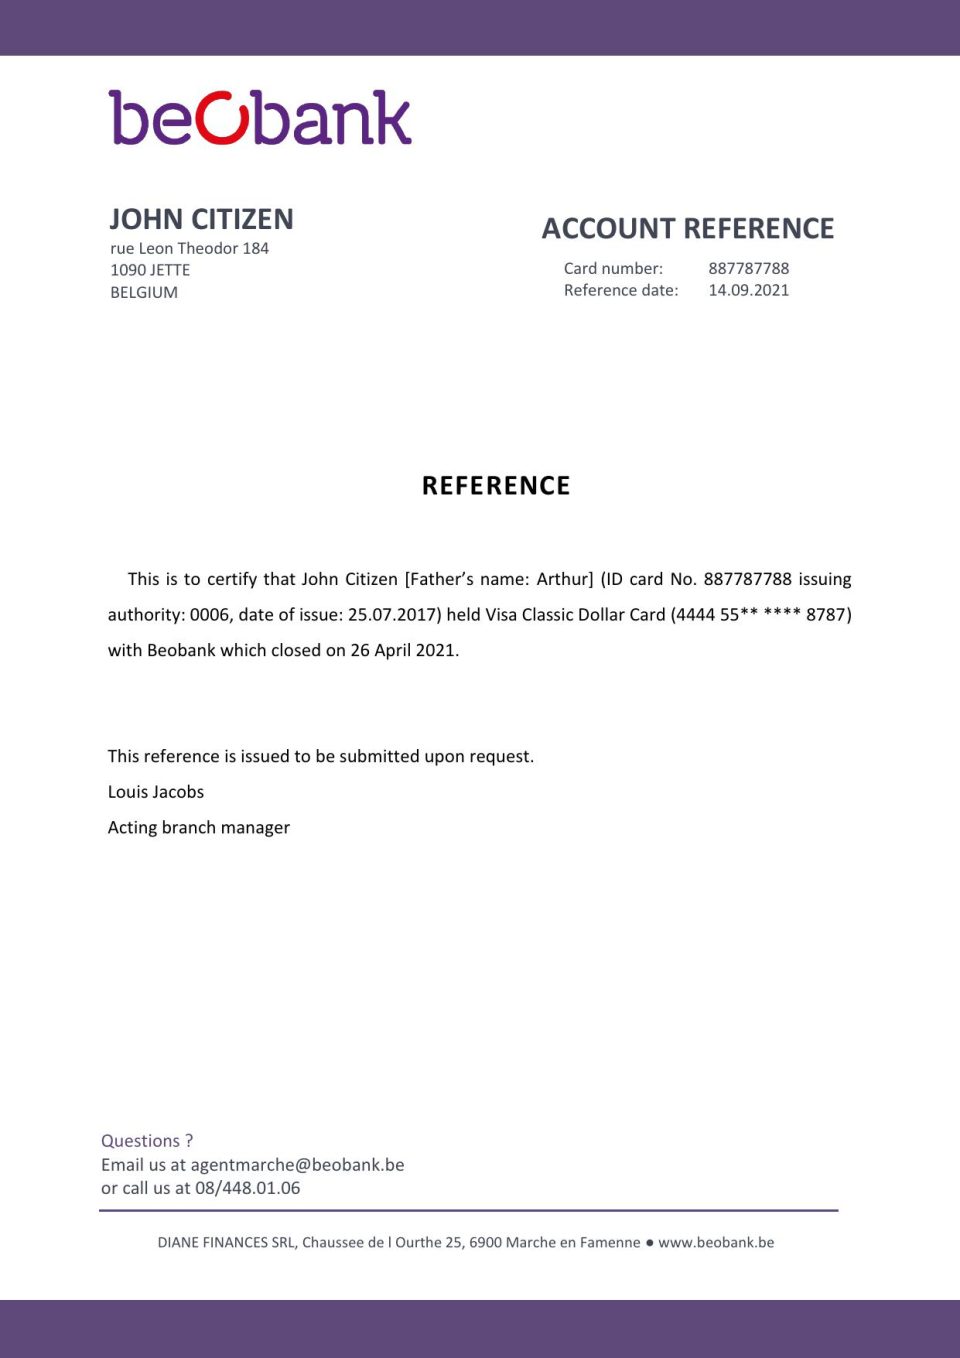 Download Belgium Beobank Bank Reference Letter Templates | Editable Word